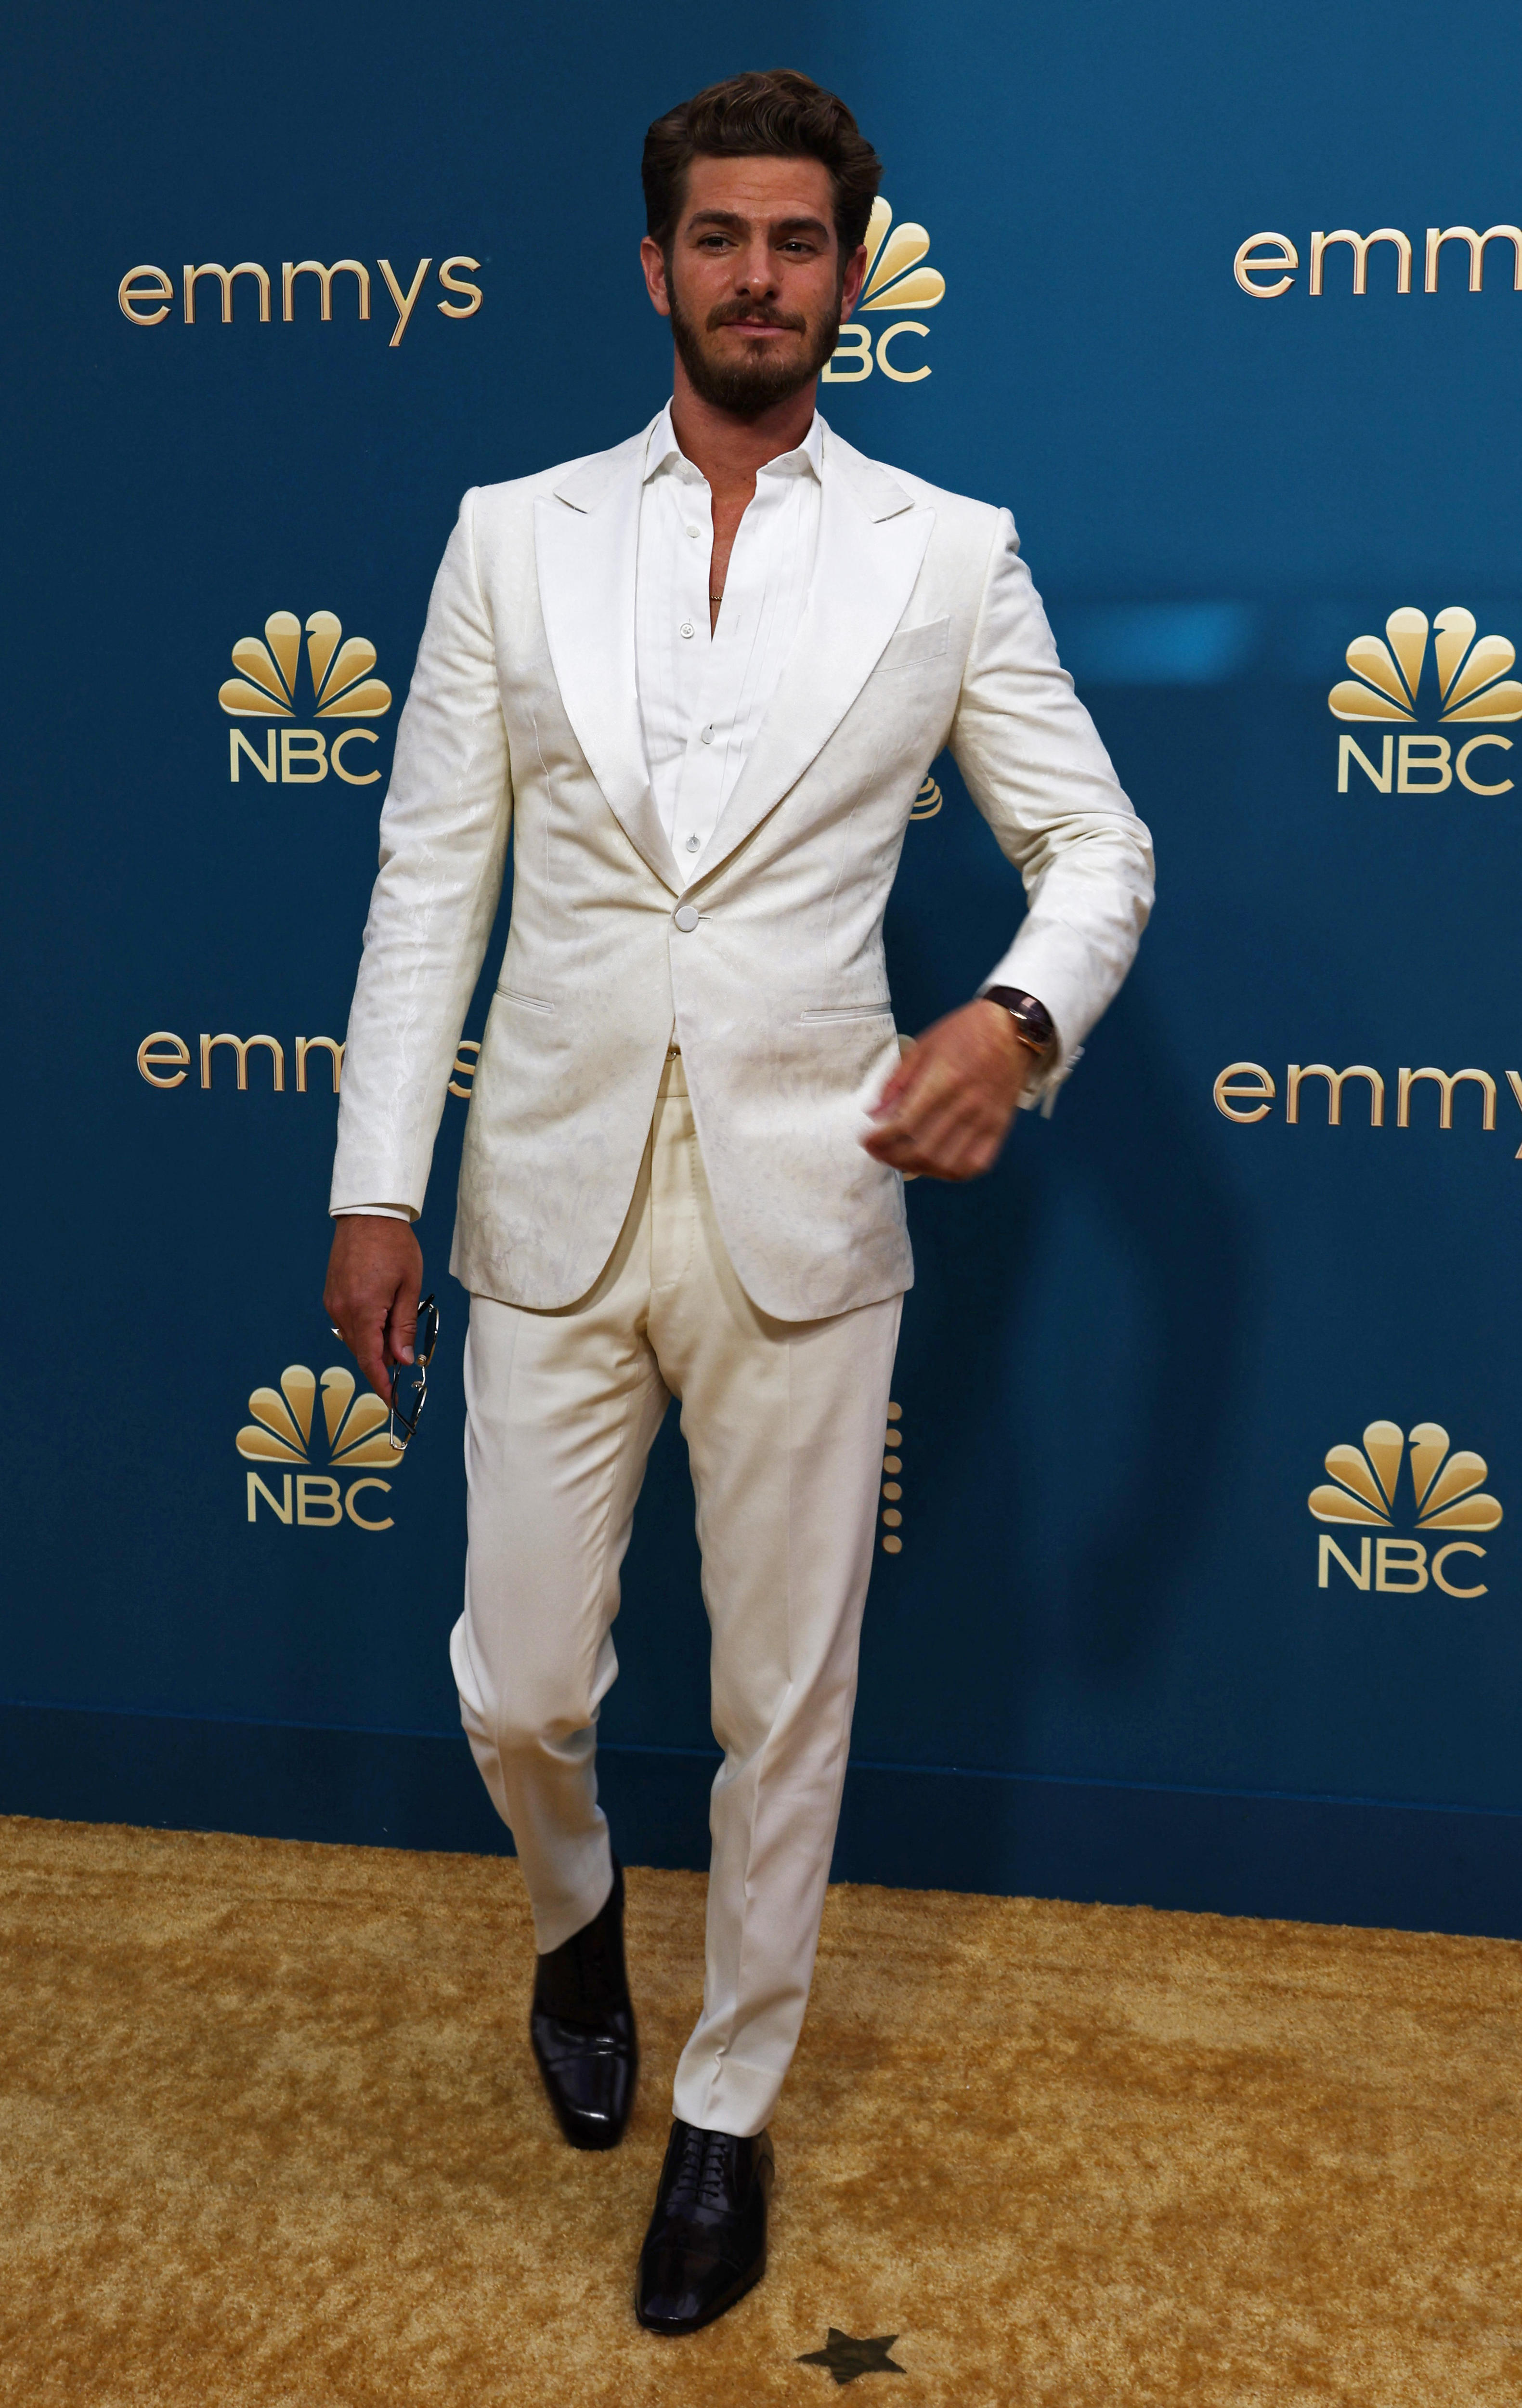 Andrew Garfield wearing an all-white suit, holding a pair of sunglasses